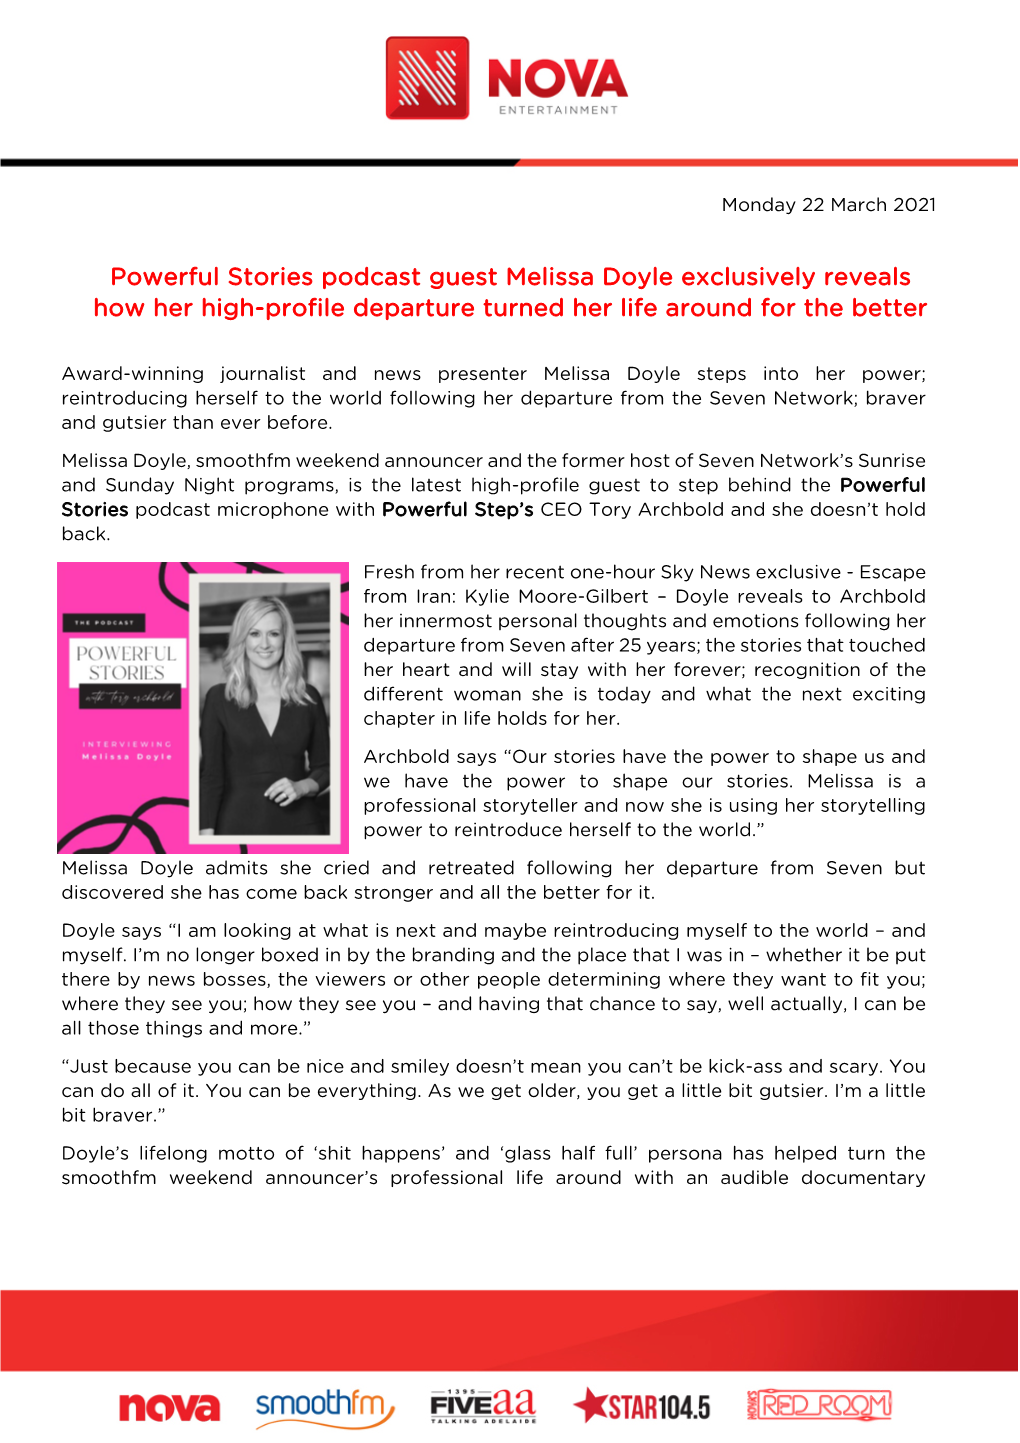 Powerful Stories Podcast Guest Melissa Doyle Exclusively Reveals How Her High-Profile Departure Turned Her Life Around for the Better